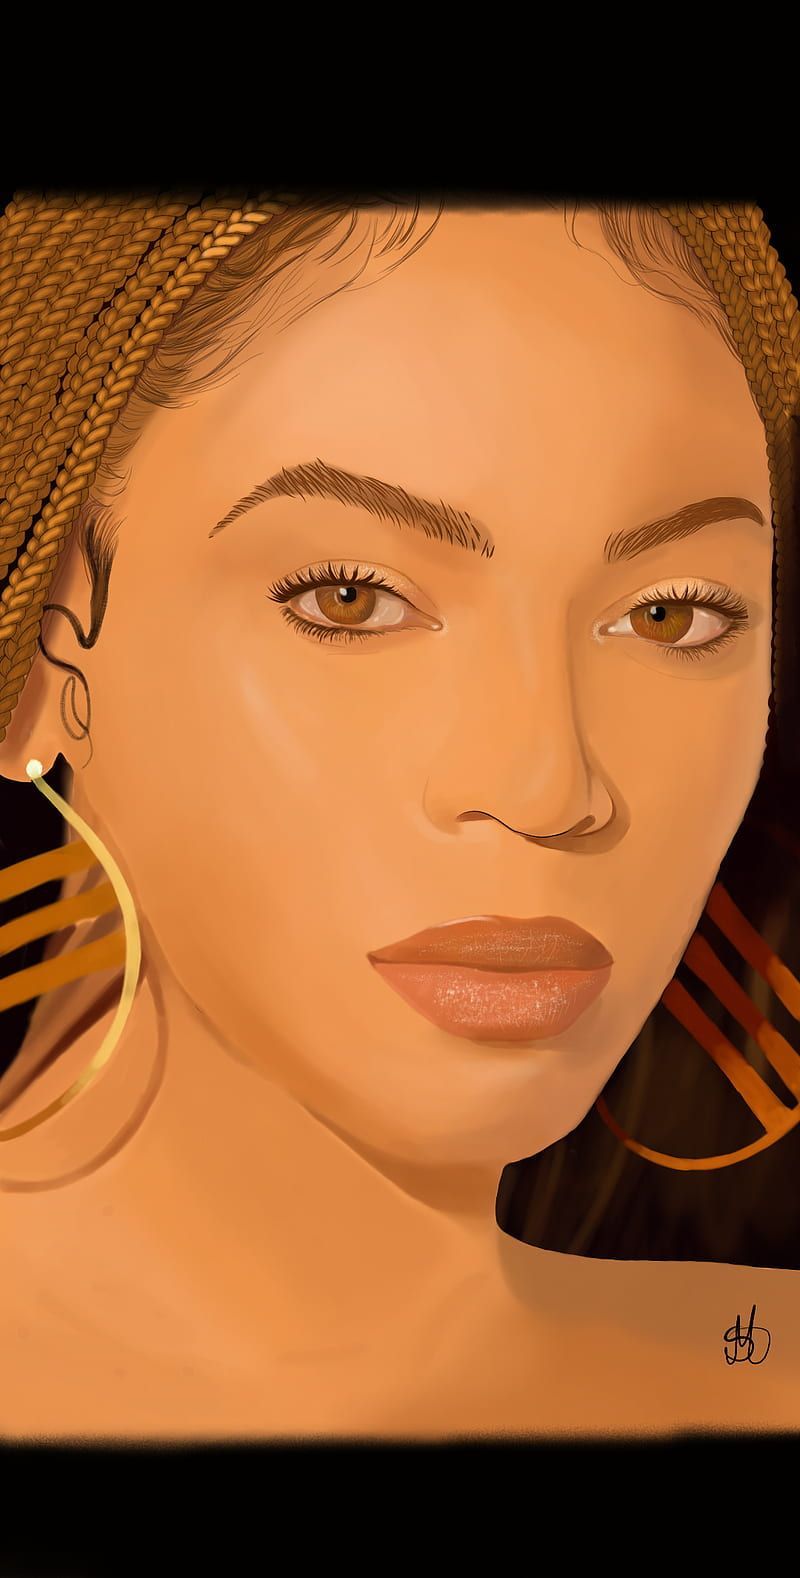 beyonce wallpaper iphone latest